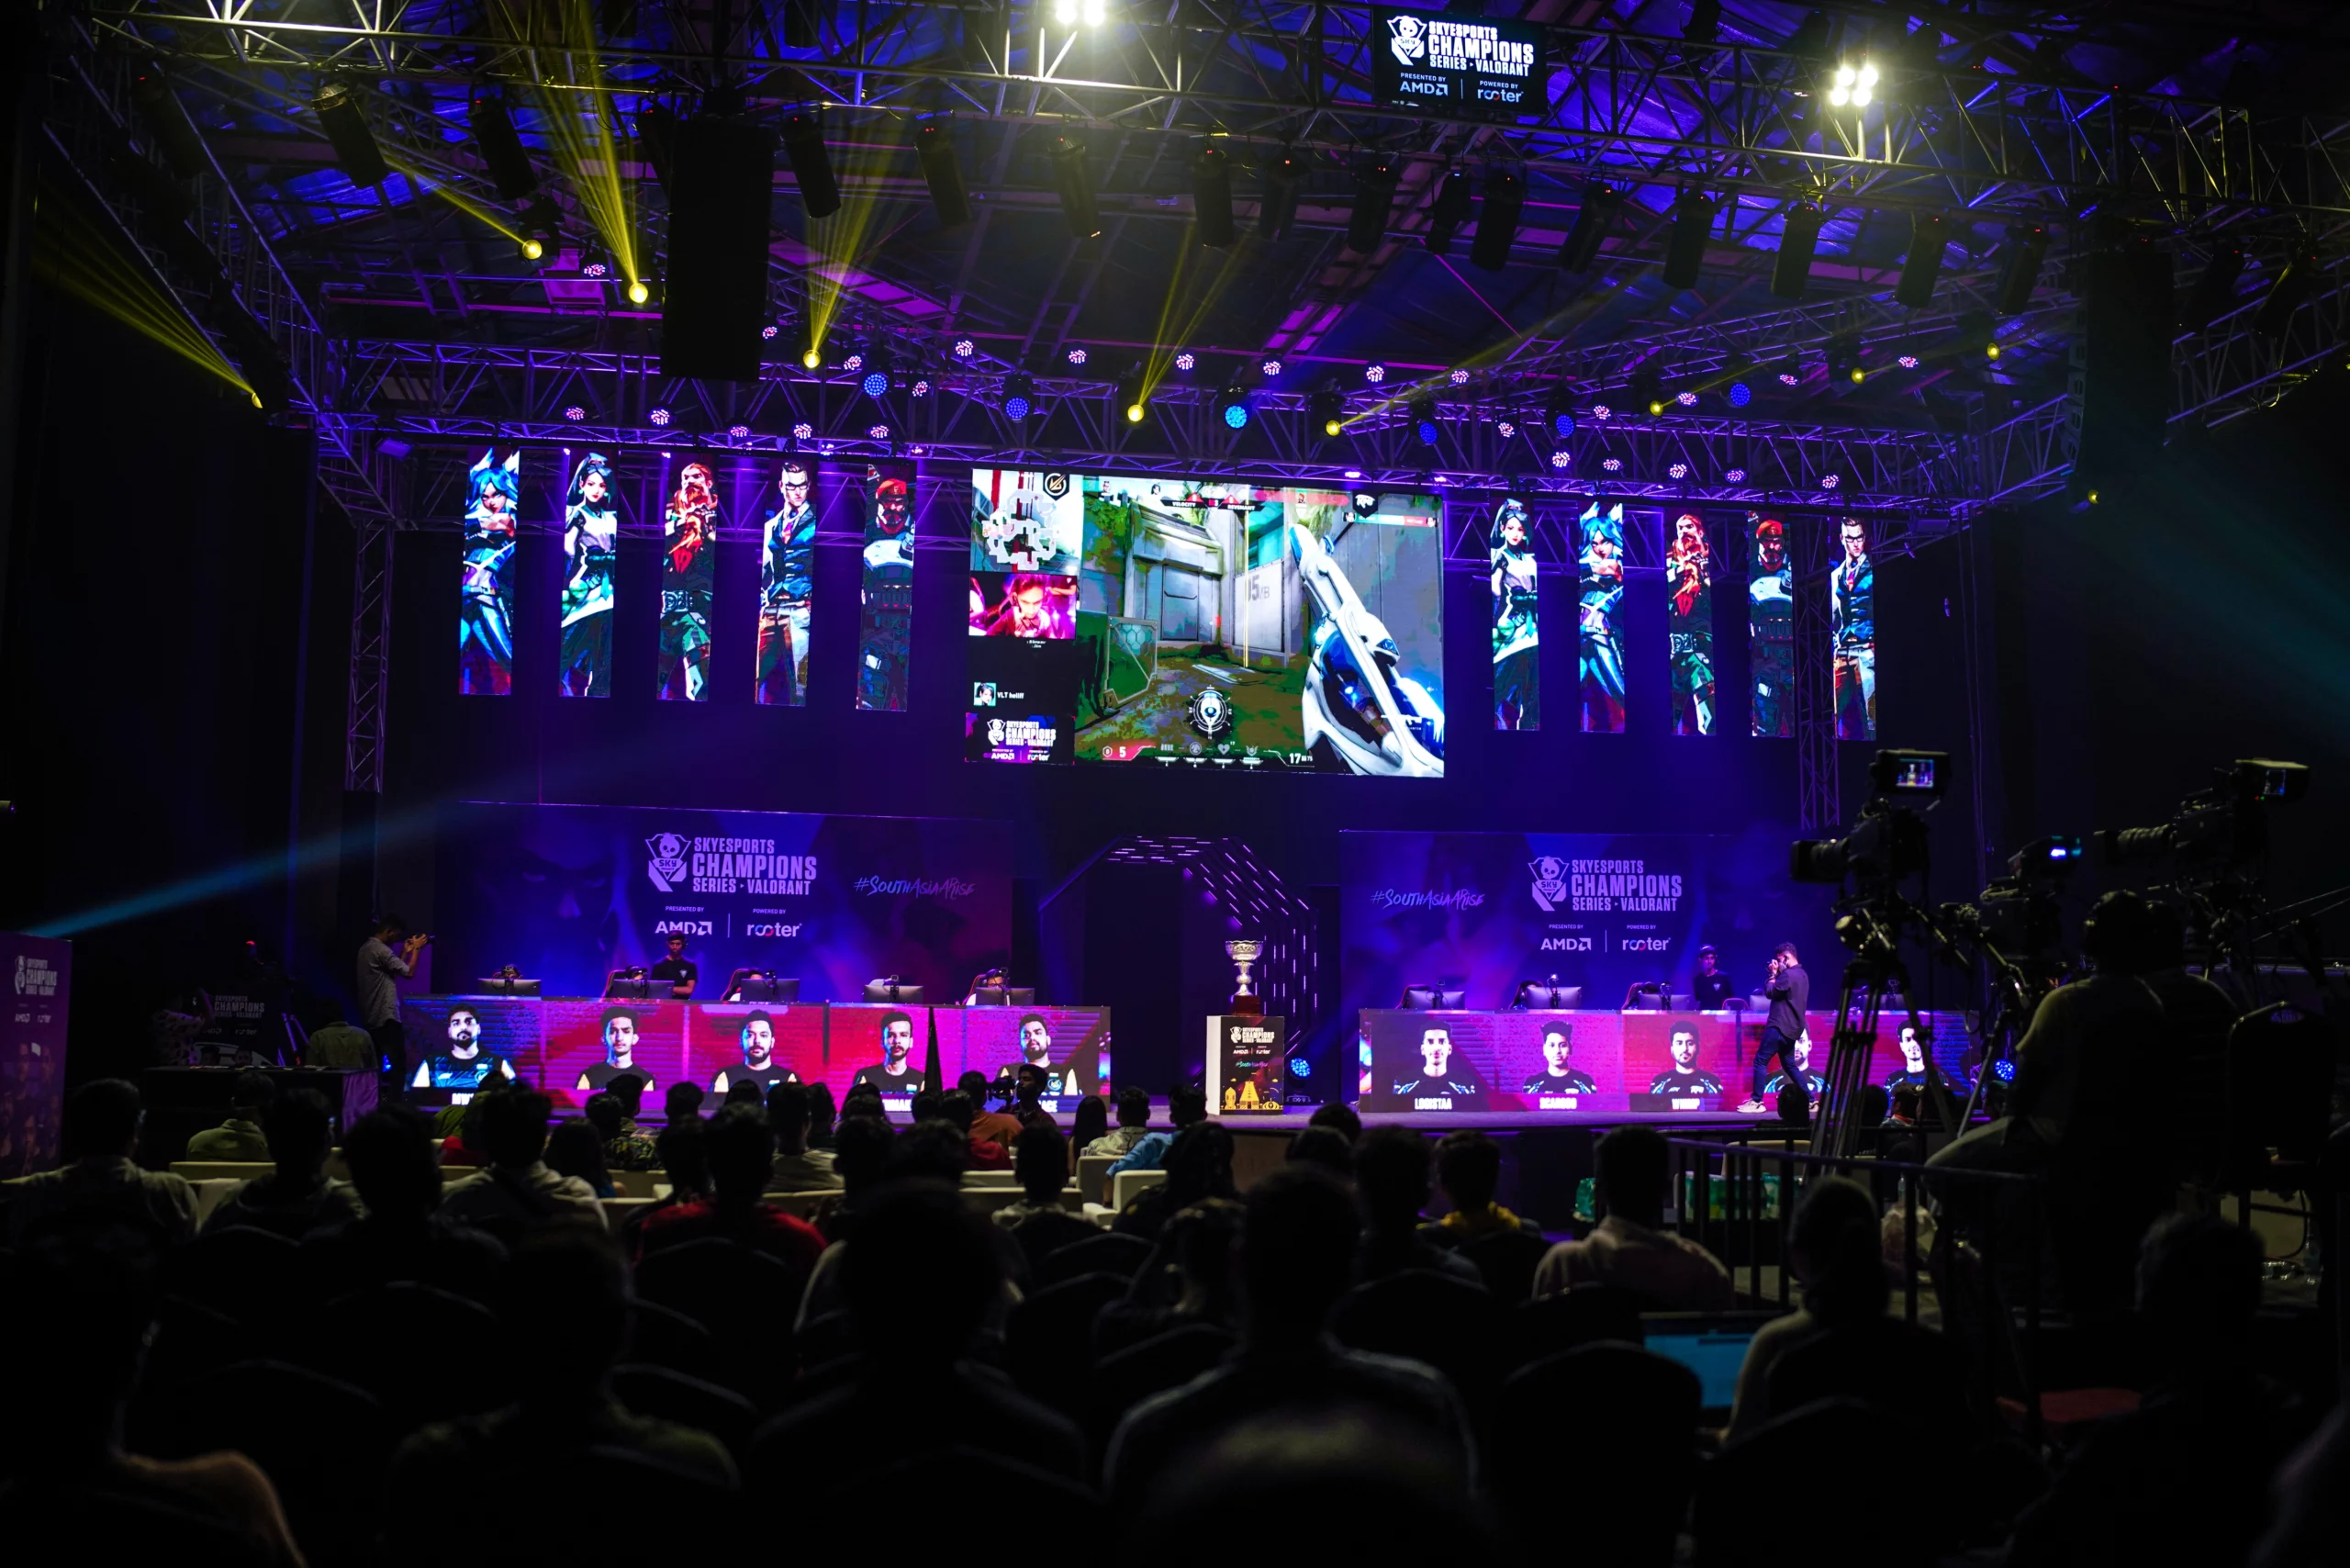 India’s esports industry made $22.3 million in revenue in 2022